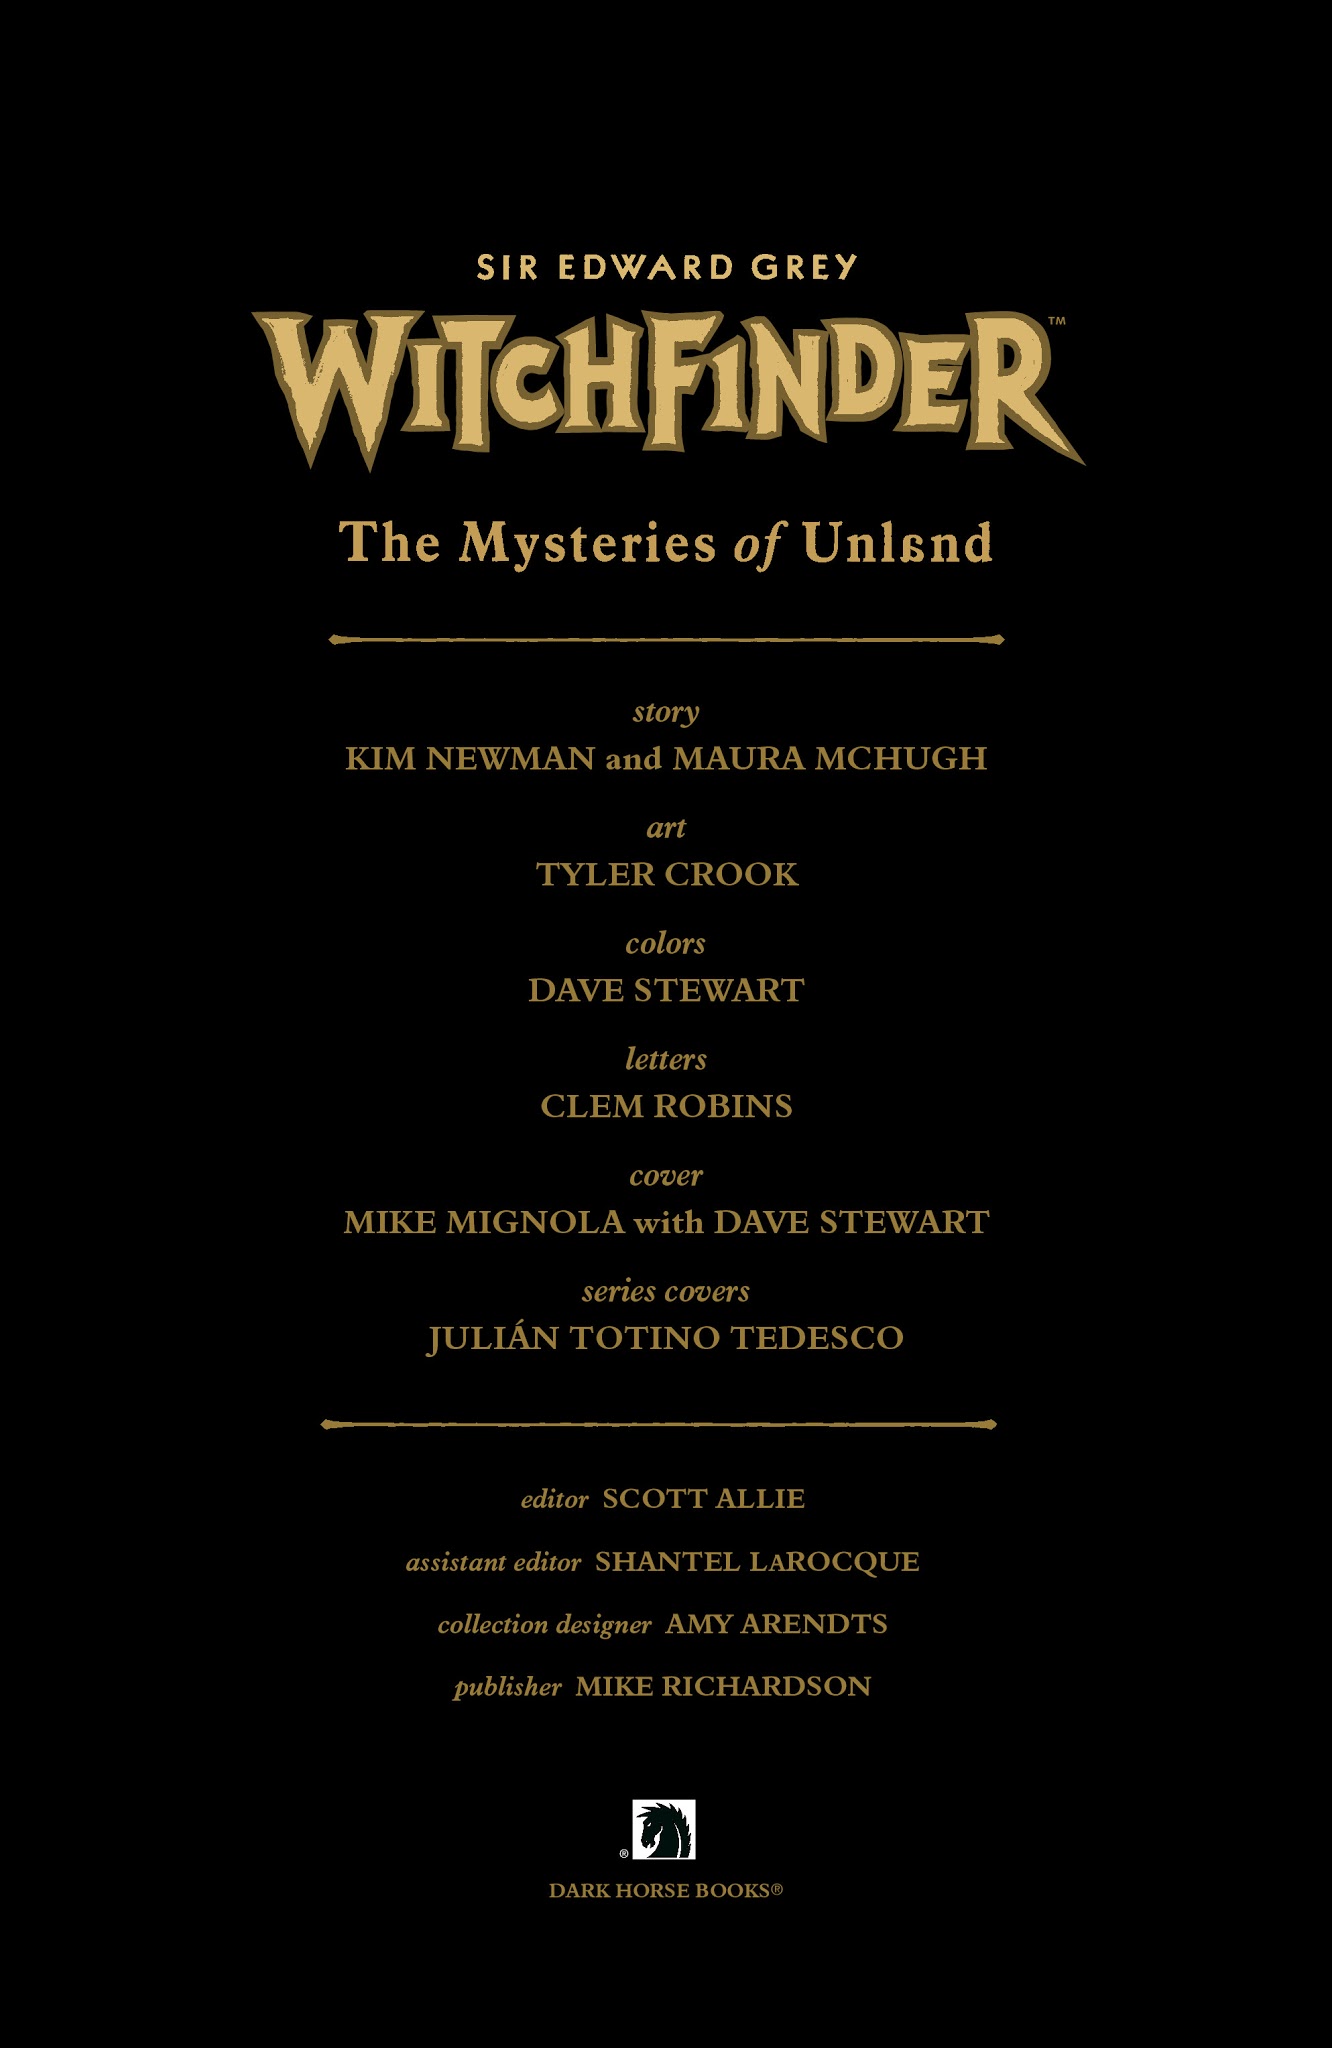 Read online Sir Edward Grey, Witchfinder: The Mysteries of Unland comic -  Issue # TPB - 5